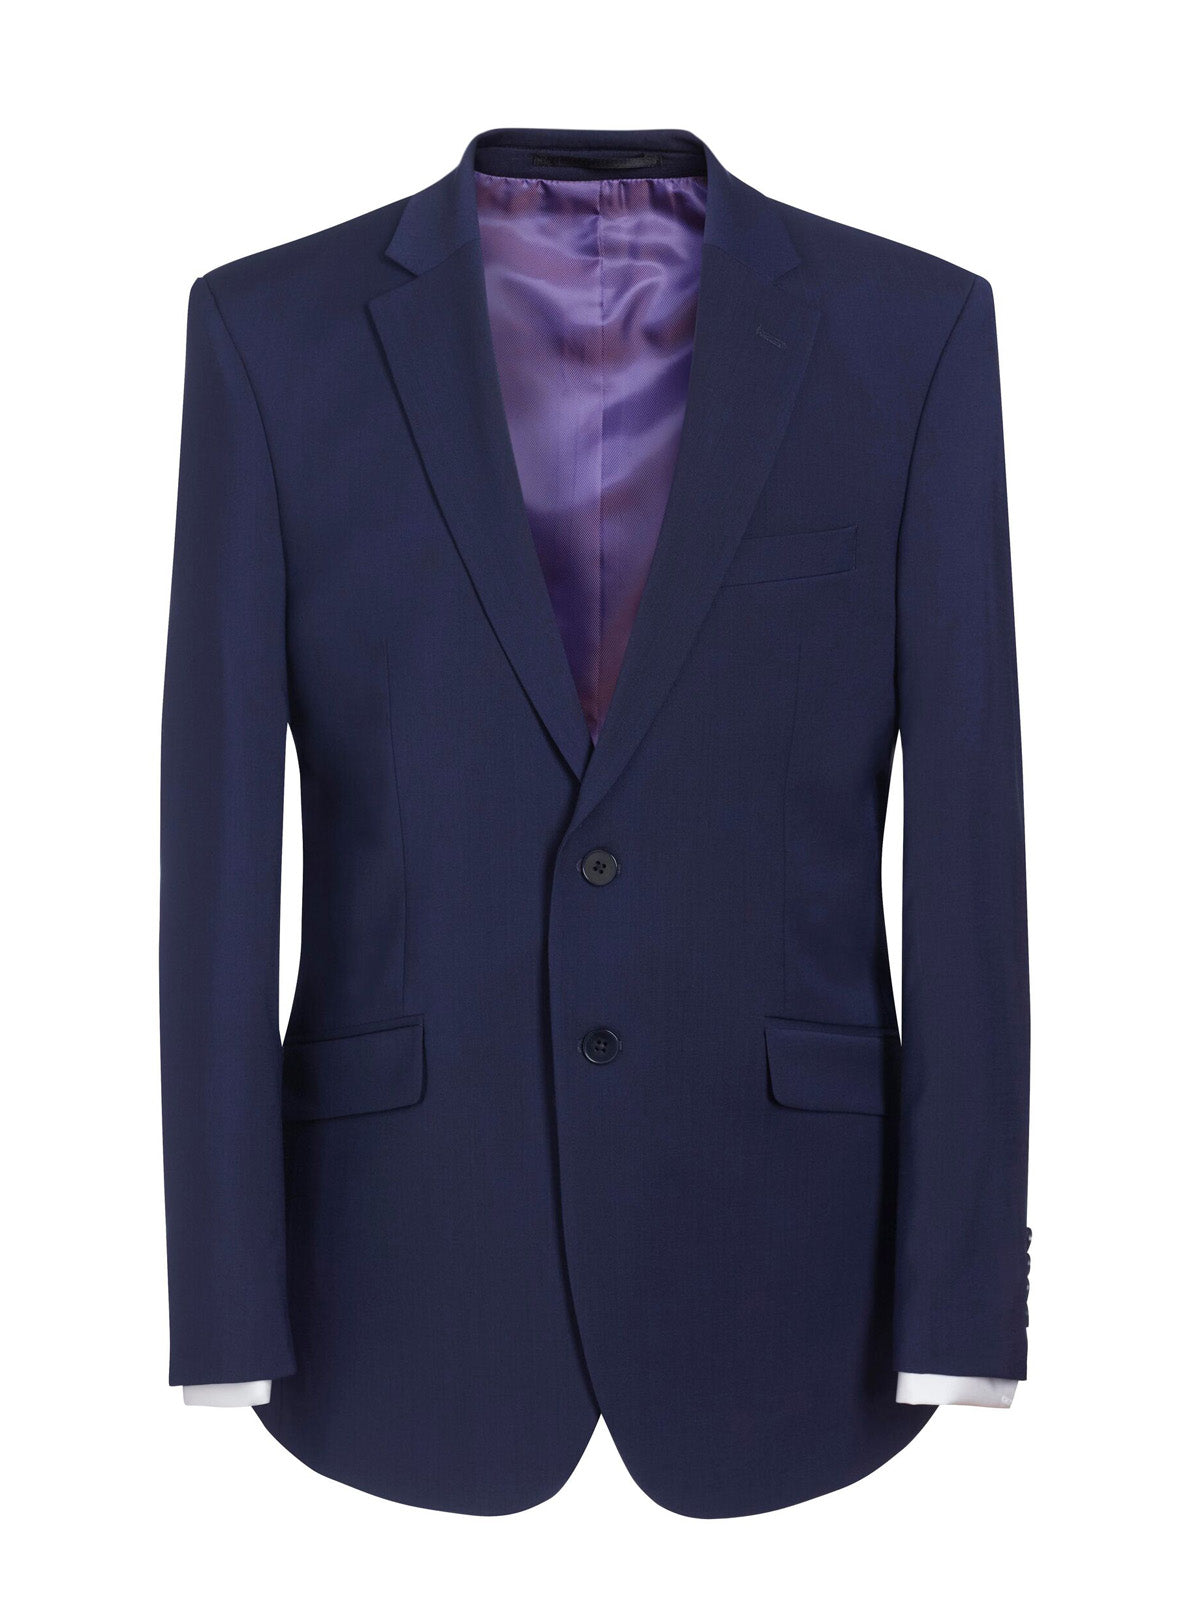 Brook Taverner Avalino Tailored Fit Jacket in Mid Blue